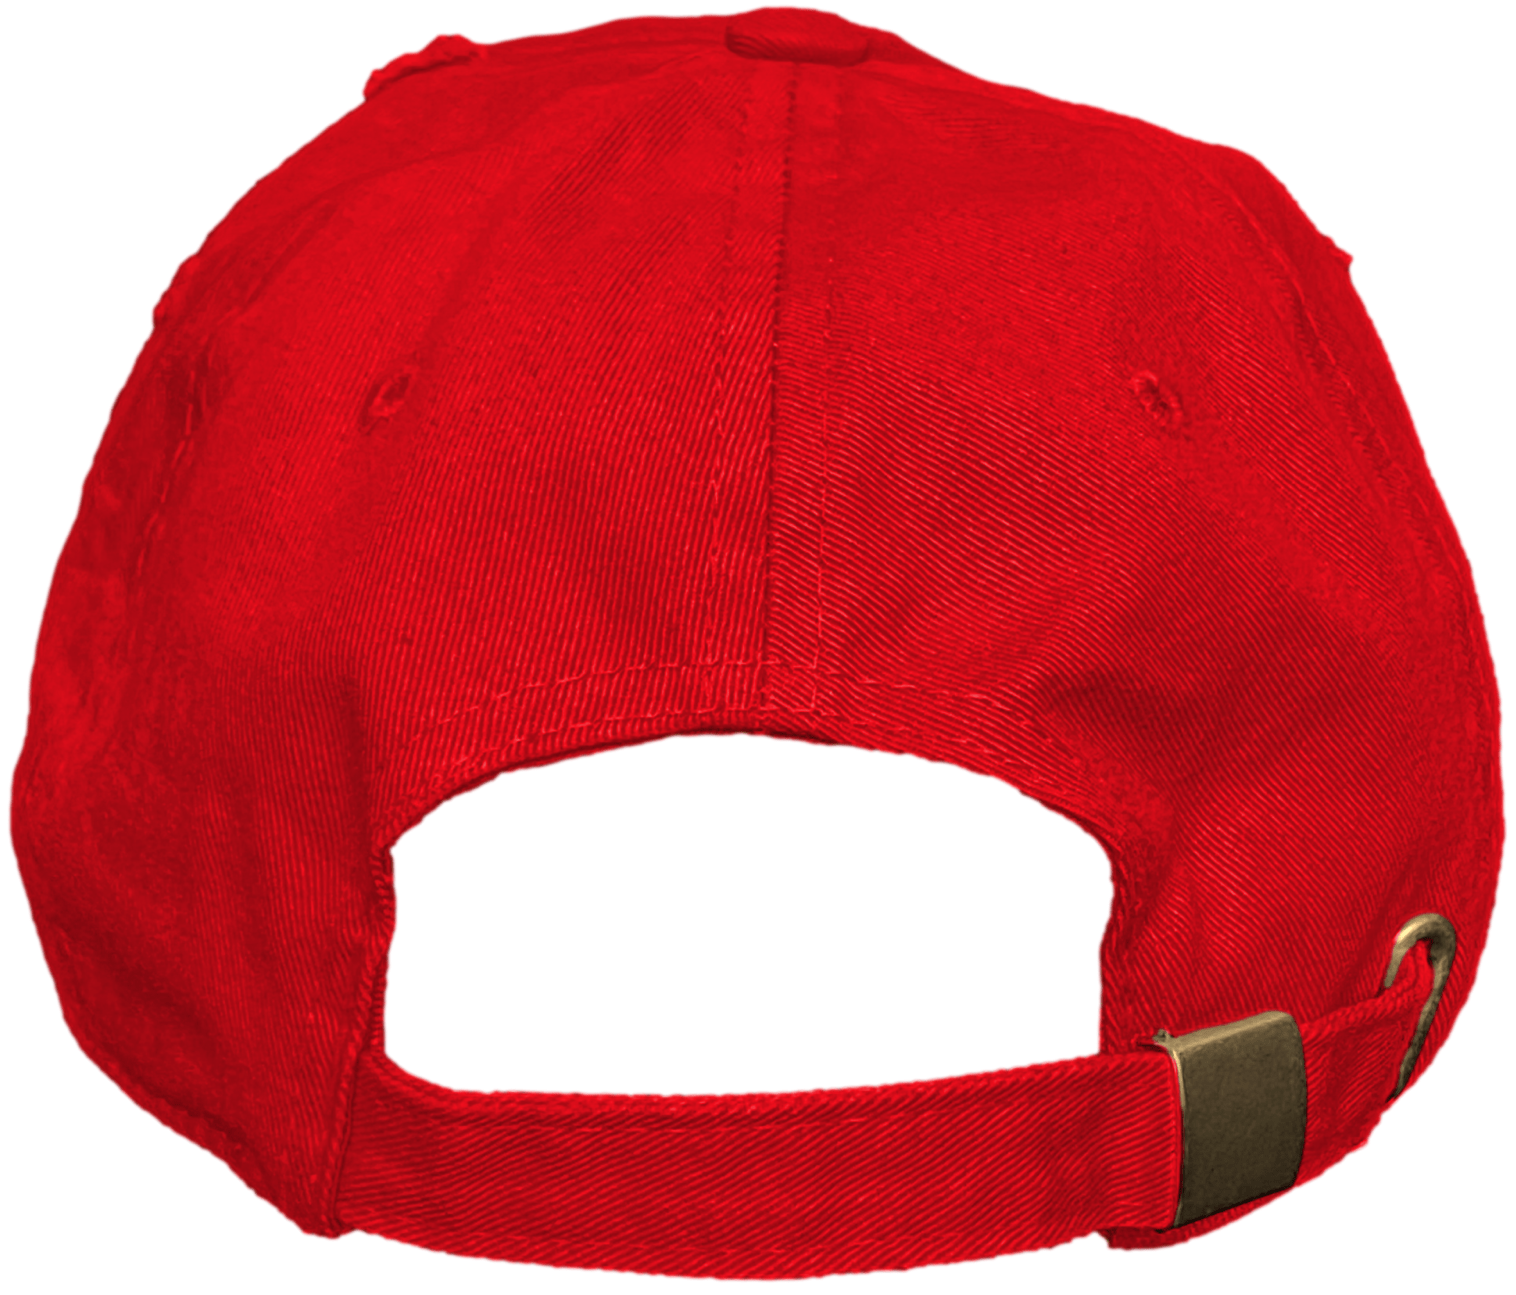 Red Taxi 12s Dad Hat - Jordan 12 Red Taxi Hats - Red F#ck